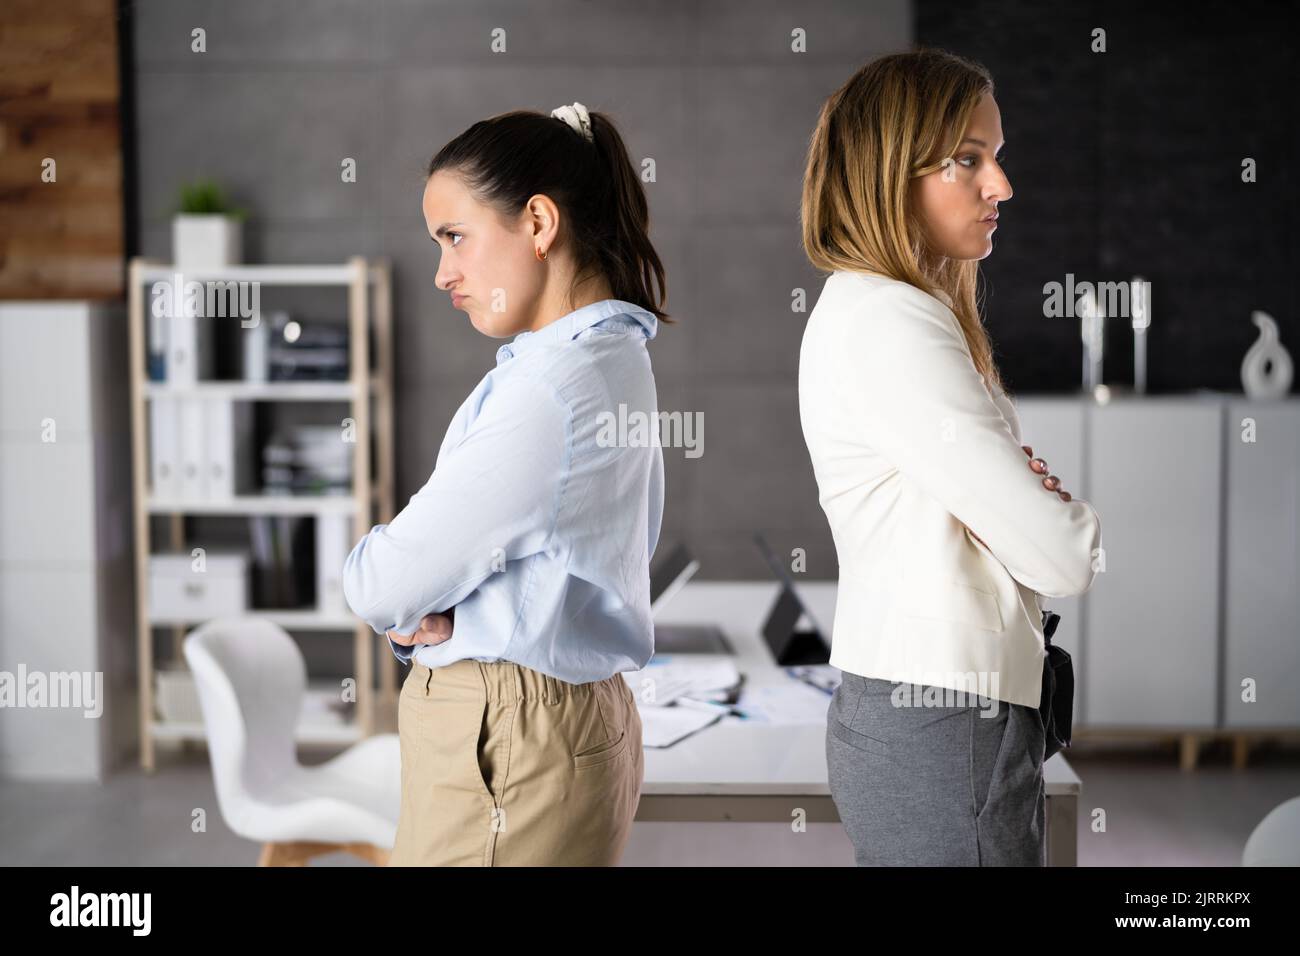 Angry Sad Businesswoman Conflict. Unhappy Woman Problem Stock Photo